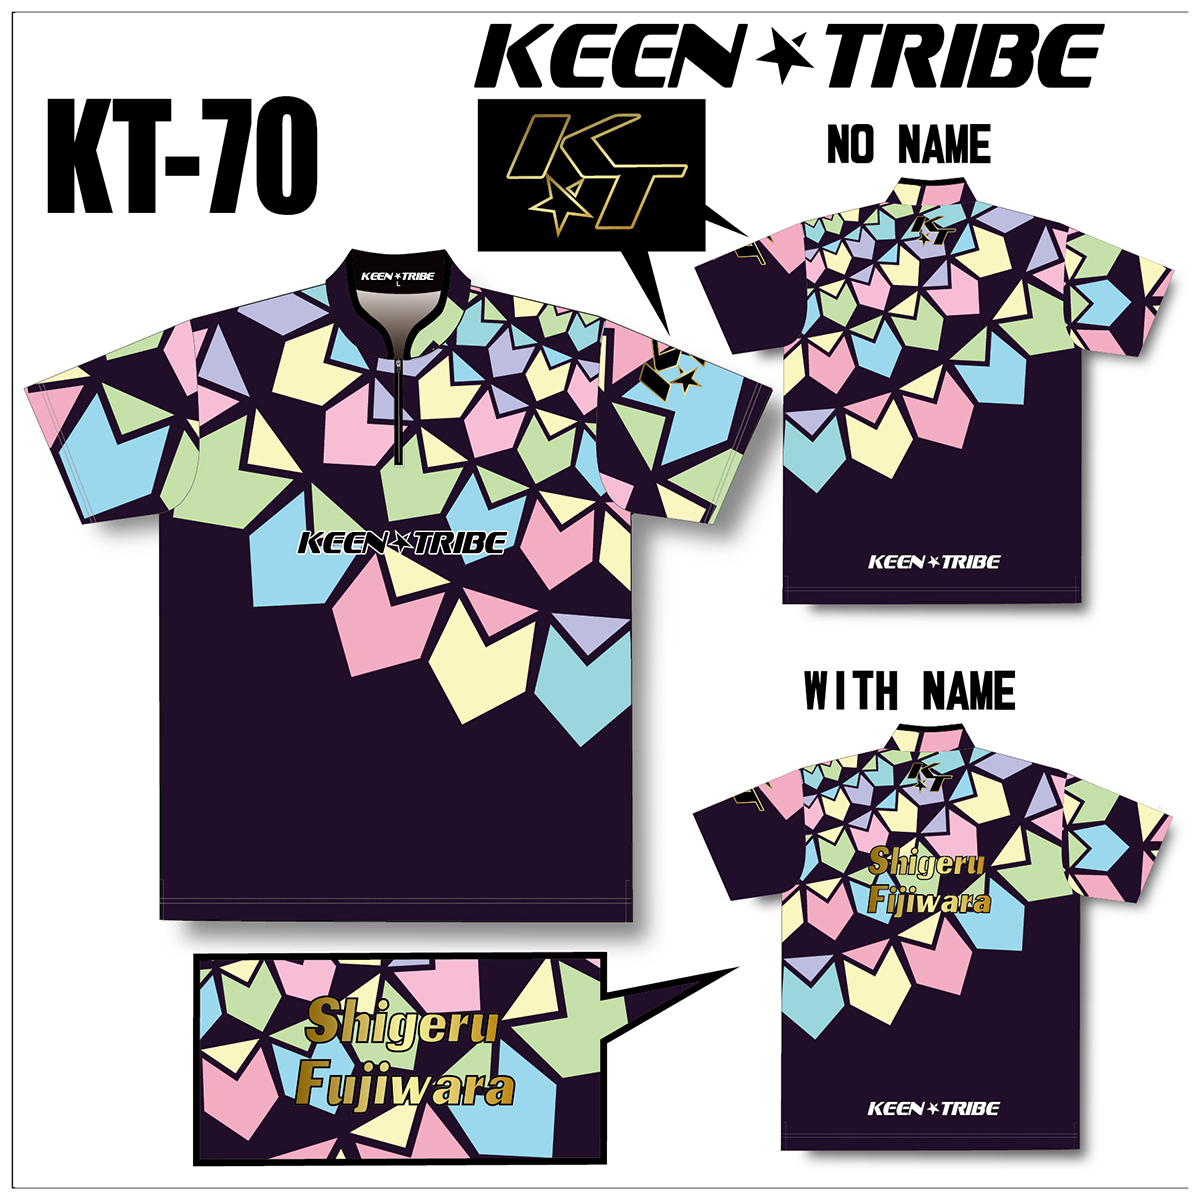 KEEN ★ TRIBE　KT-70(受注生産)